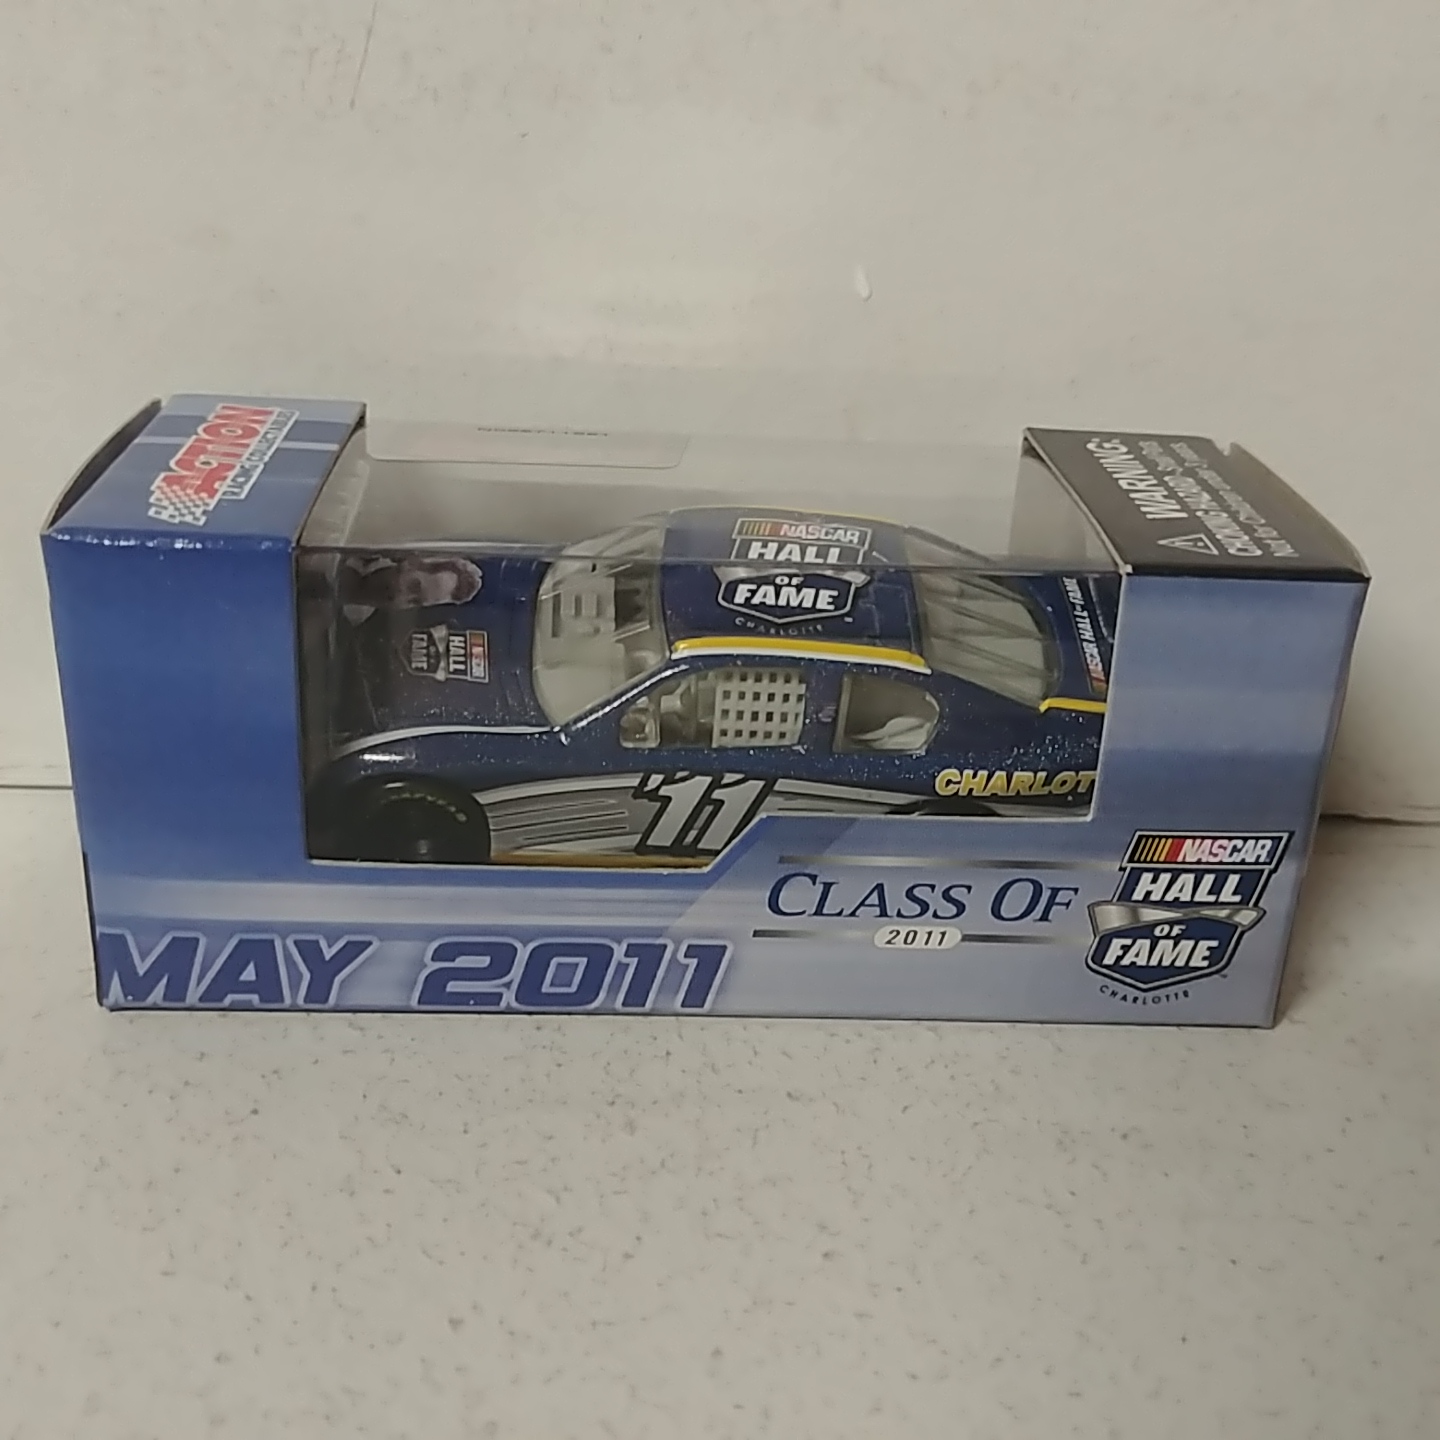 2011 David Pearson 1/64th "Nascar Hall of Fame" Pitstop Series Fusion